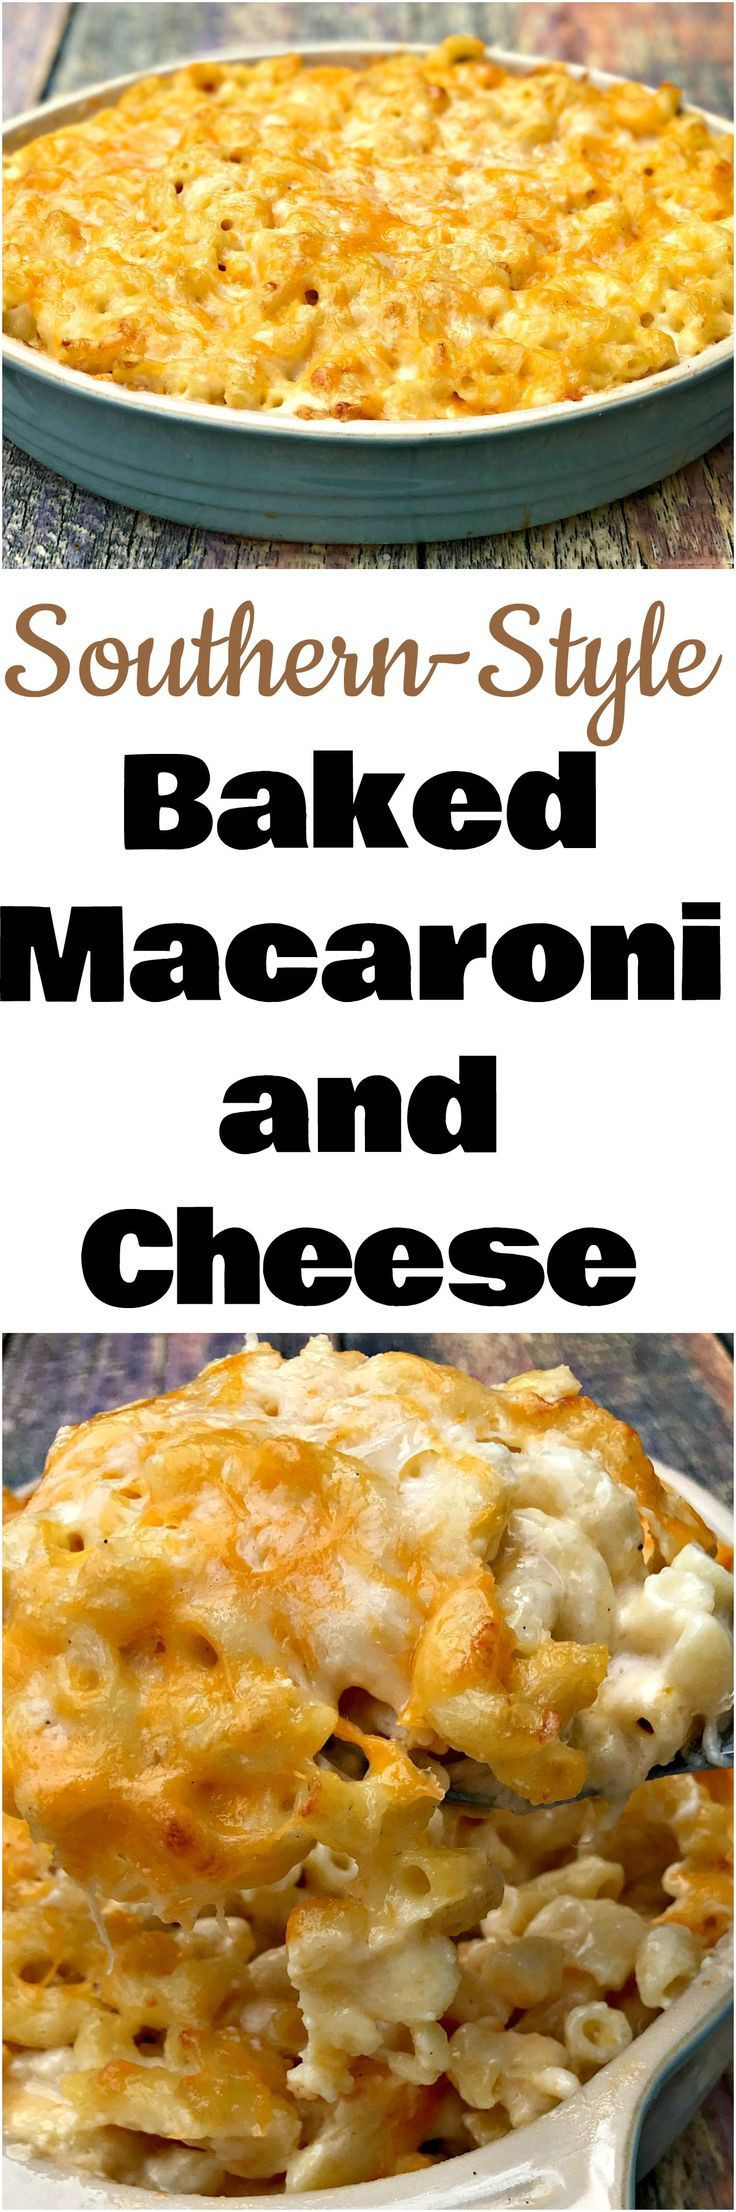 Baked Macaroni And Cheese Recipes Soul Food
 Southern Style Baked Macaroni and Cheese is a homemade